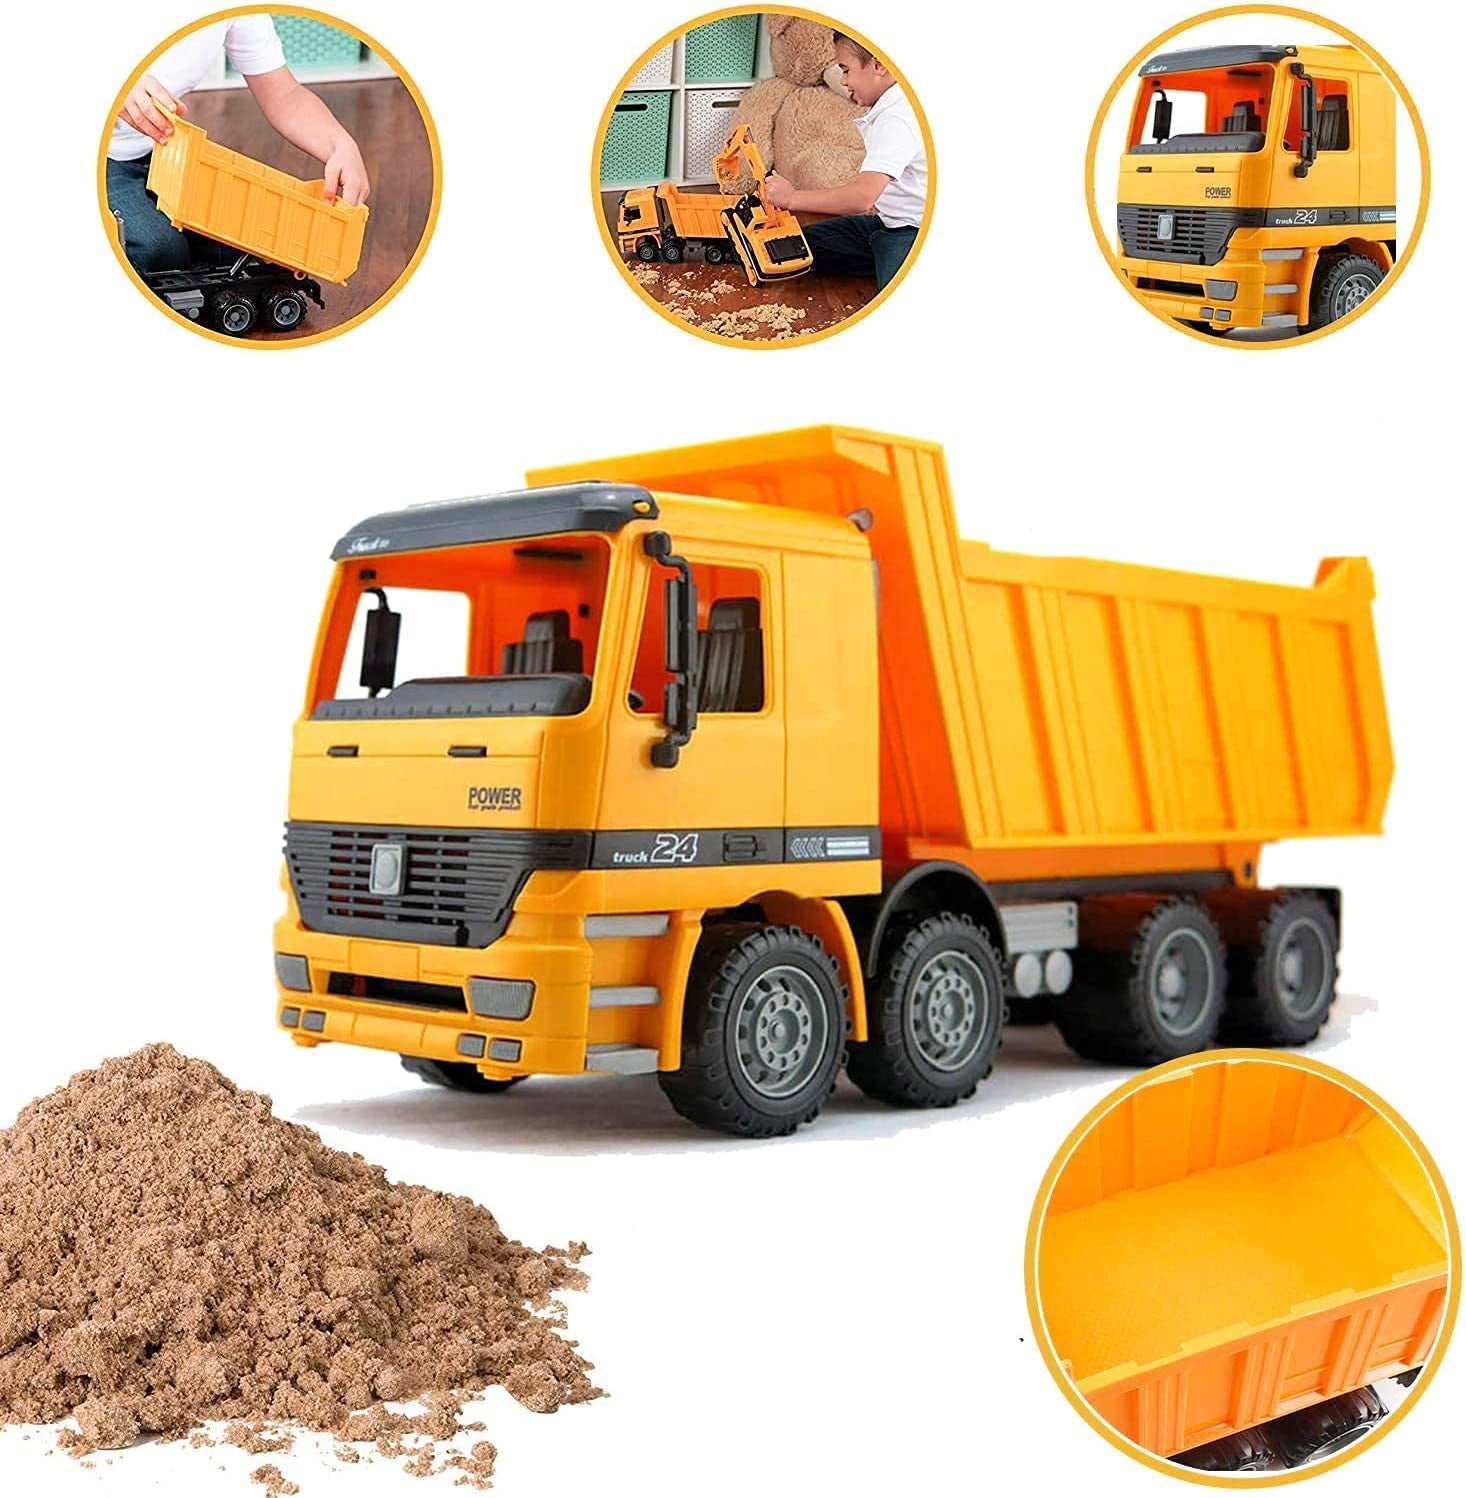 Oversized Dump Truck Toy for Kids Play, Big Friction Powered Toy Construction Vehicle with Lifting Dumping Bed